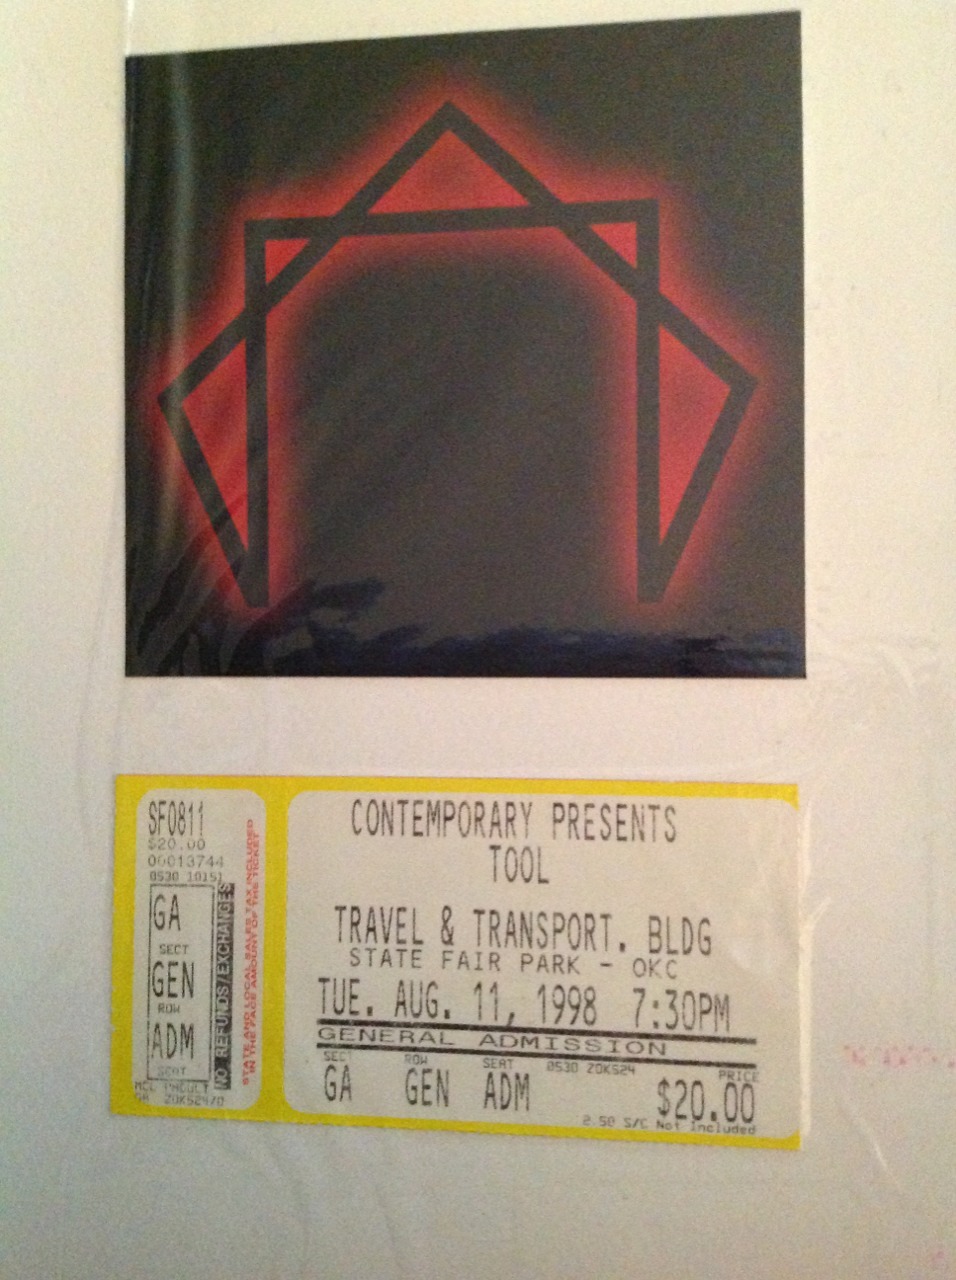 The first time i saw TOOL was in 1998 on the Aenima tour in OKC for 20 bucks&hellip;&hellip;&hellip;..